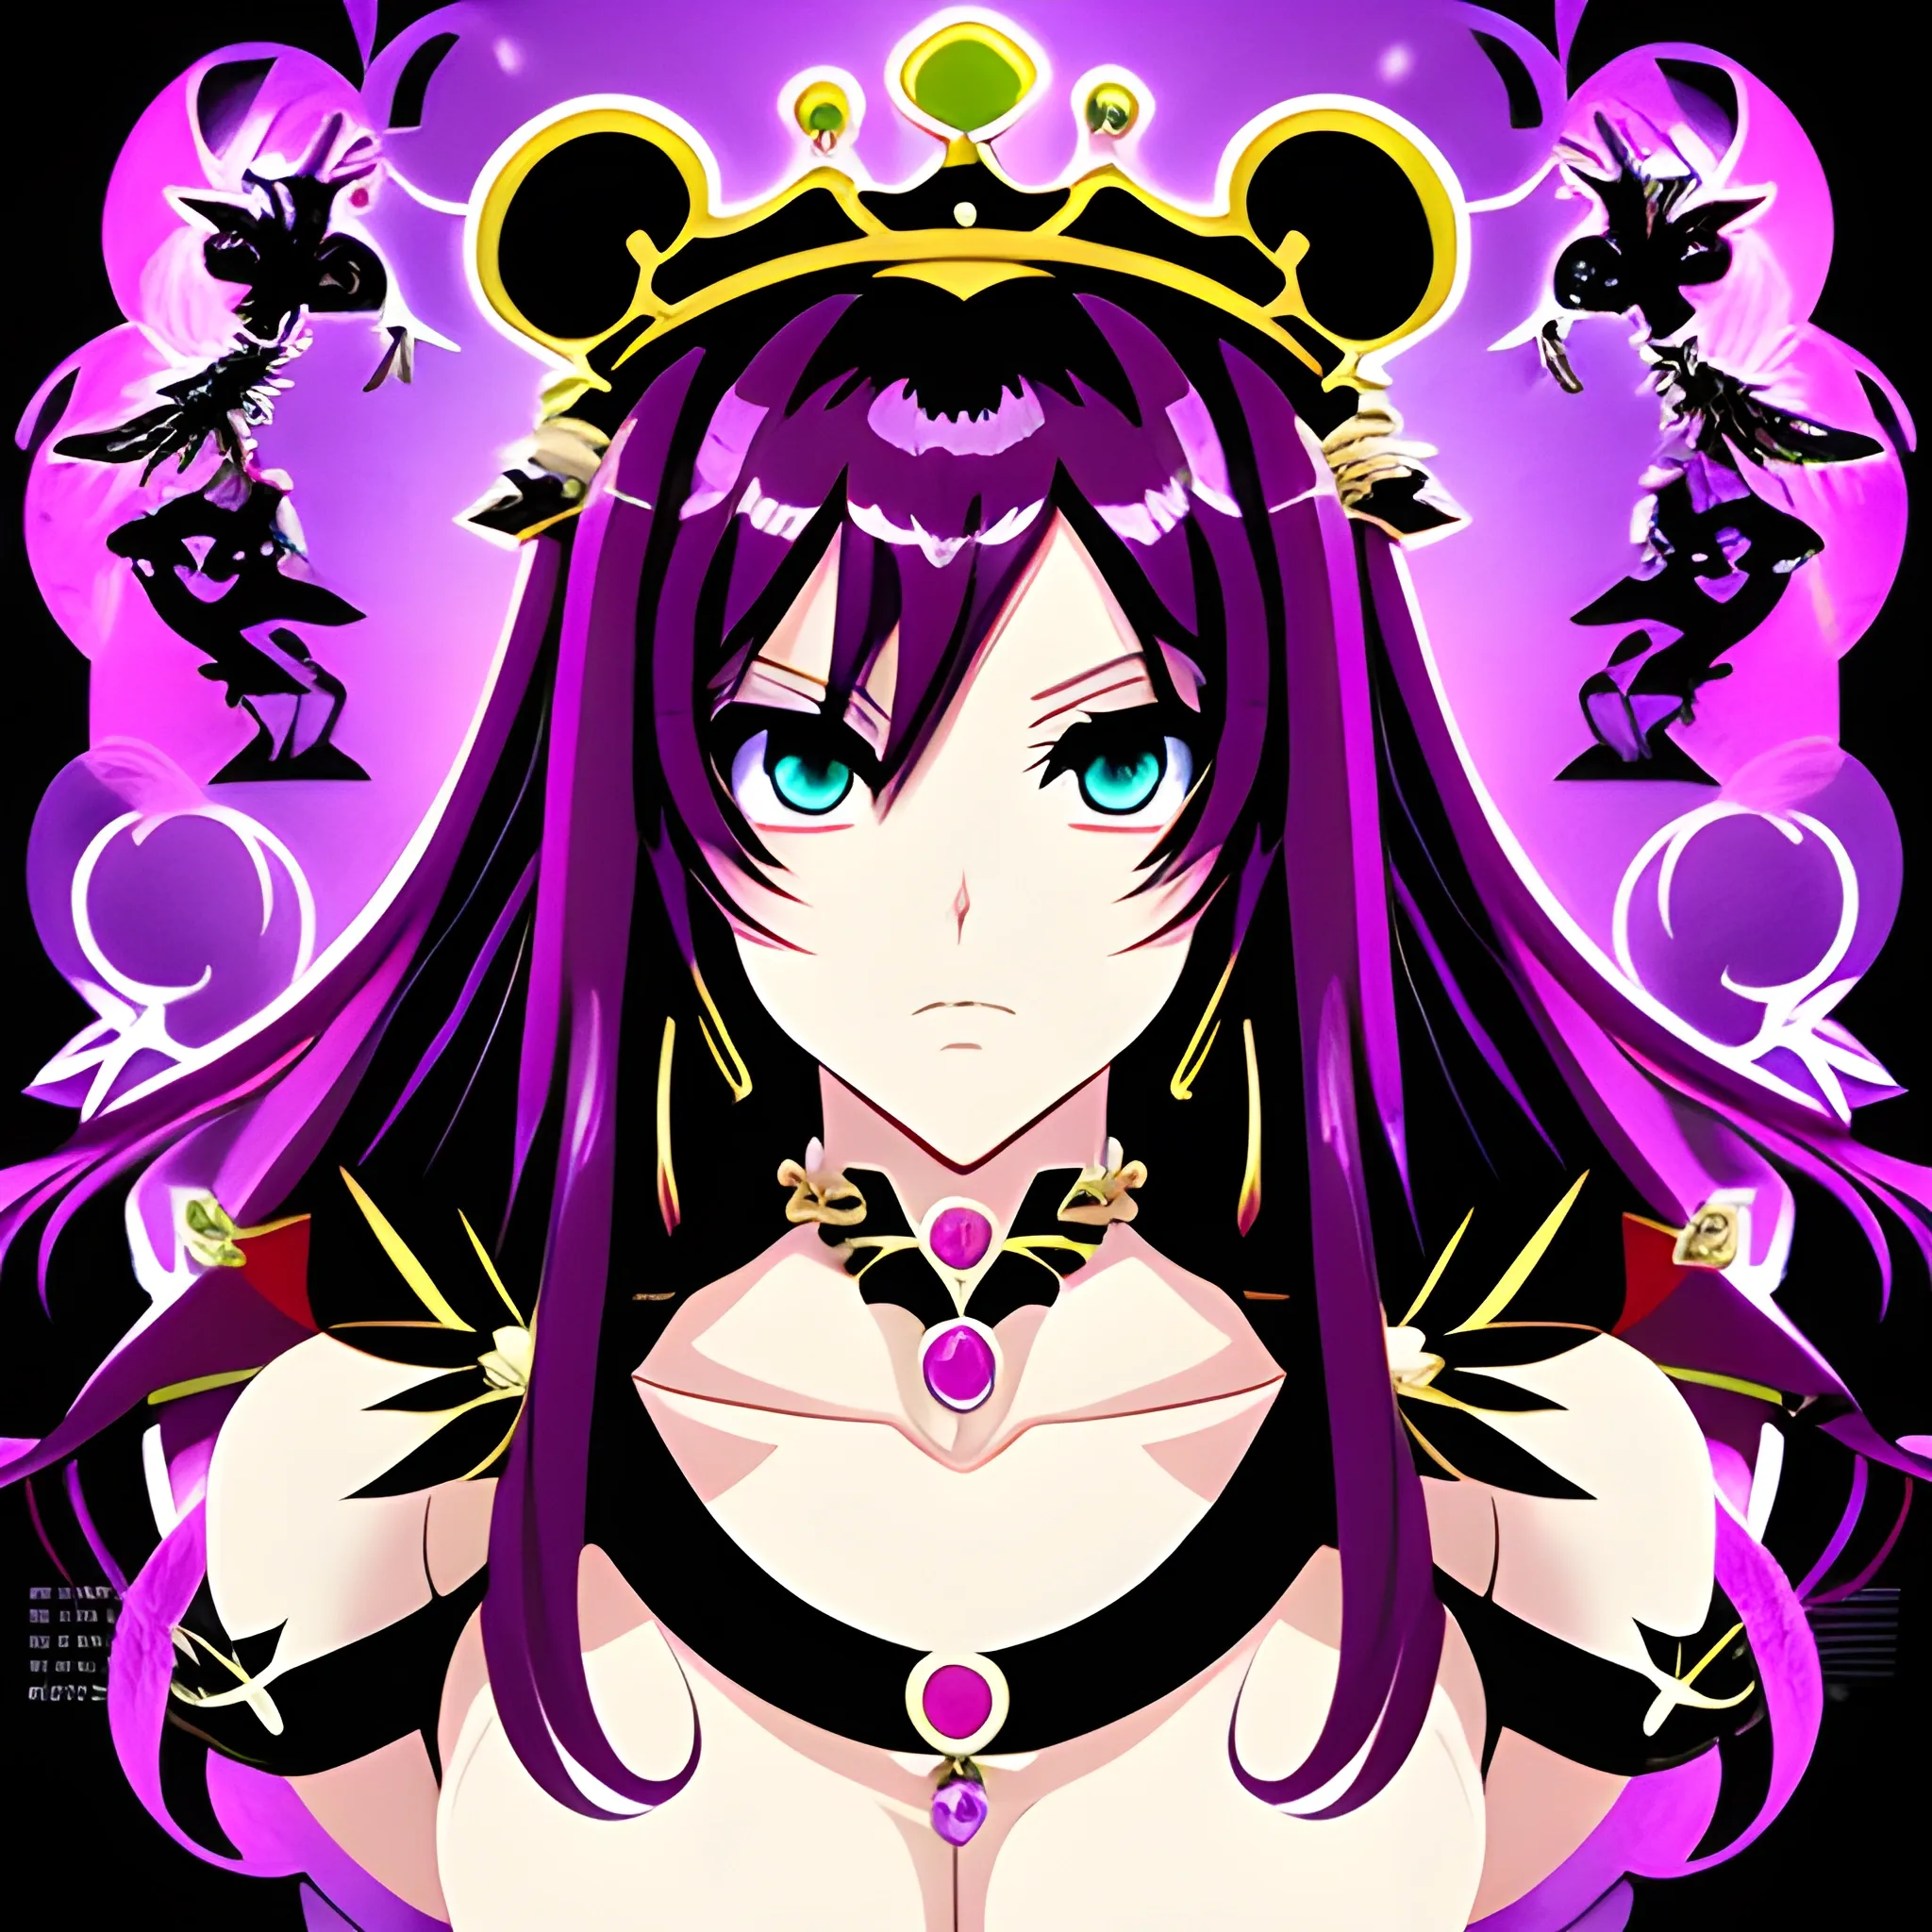 anime style Queen of Darkness woman 